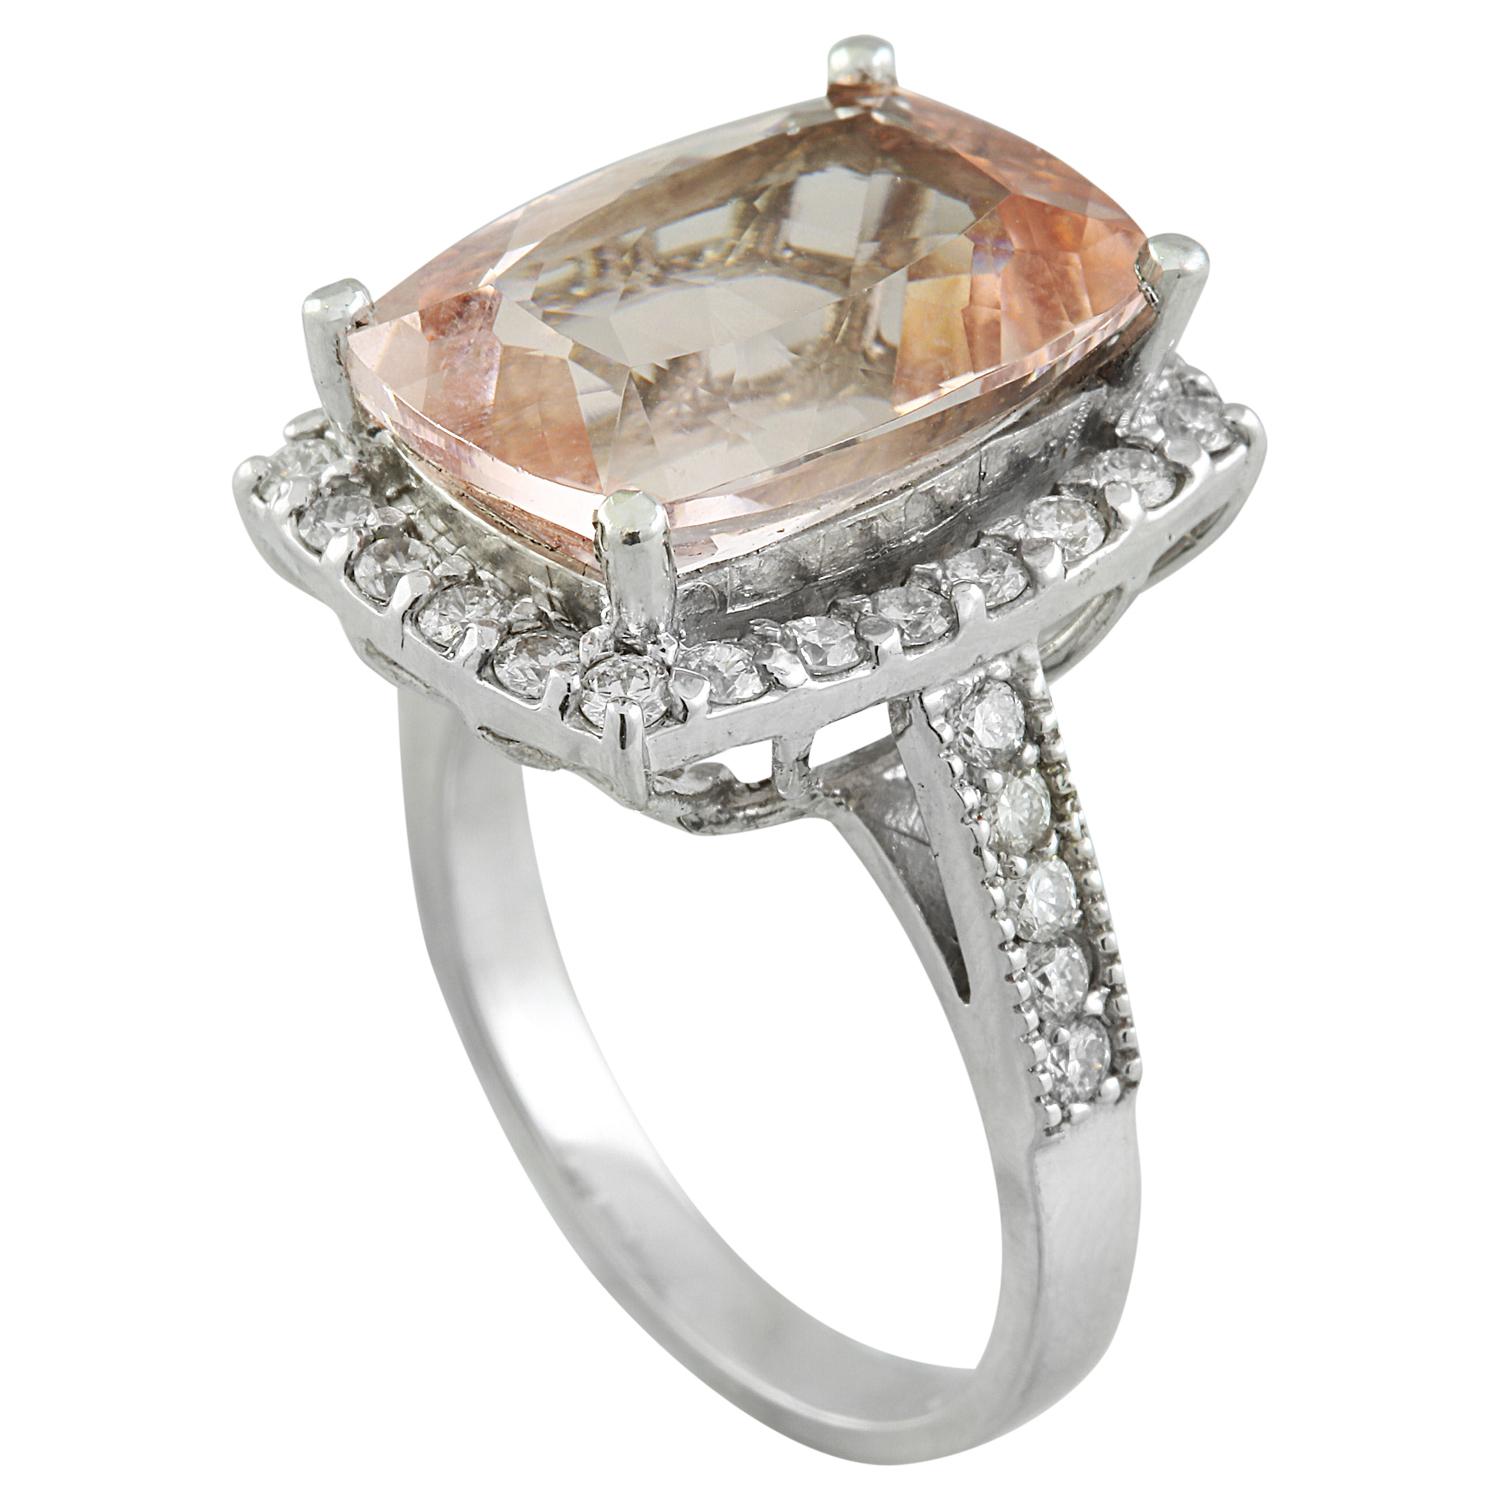 7.10 Carat Natural Morganite 14 Karat Solid White Gold Diamond Ring
Stamped: 14K 
Total Ring Weight: 6.6 Grams 
Morganite Weight: 6.30 Carat (14.00x10.00 Millimeters) 
Diamond Weight: 0.80 Carat (F-G Color, VS2-SI1 Clarity)
Quantity: 34
Face